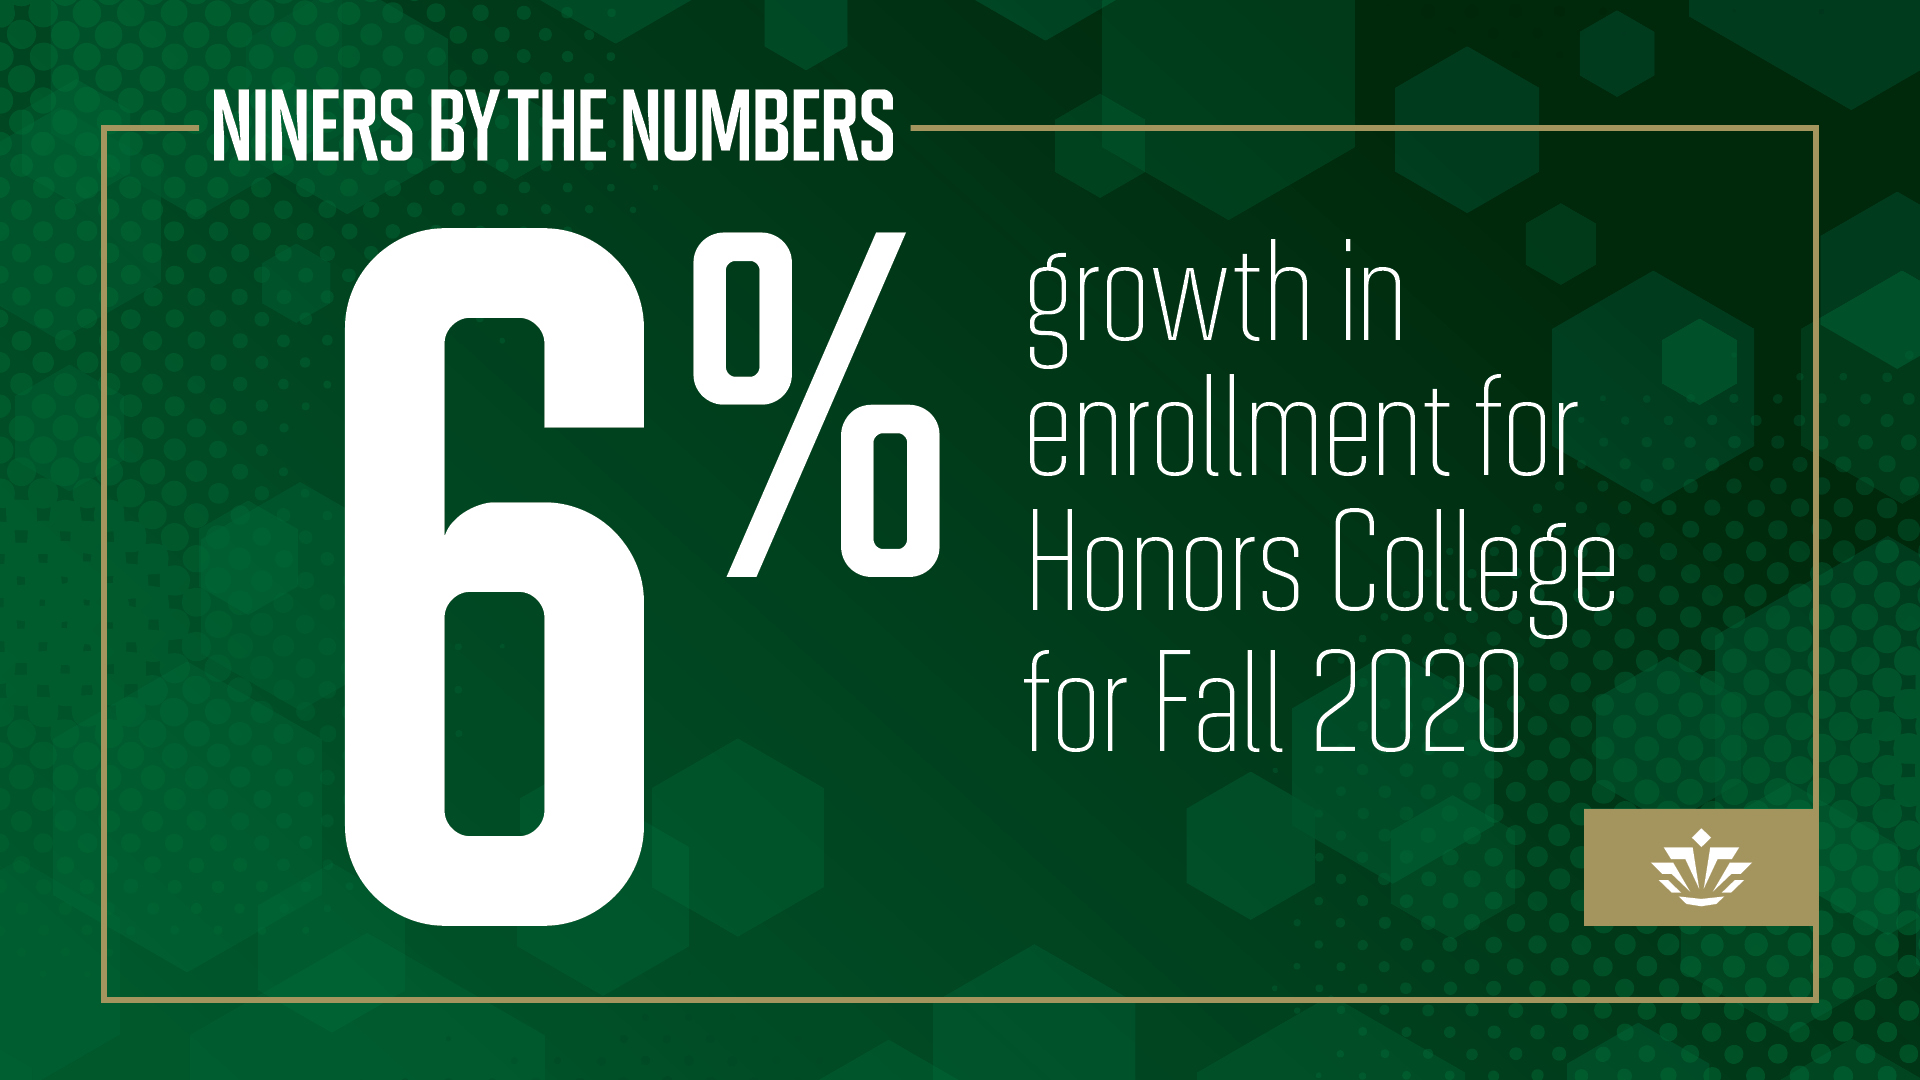 6% growth in enrollment for Honors College for Fall 2020